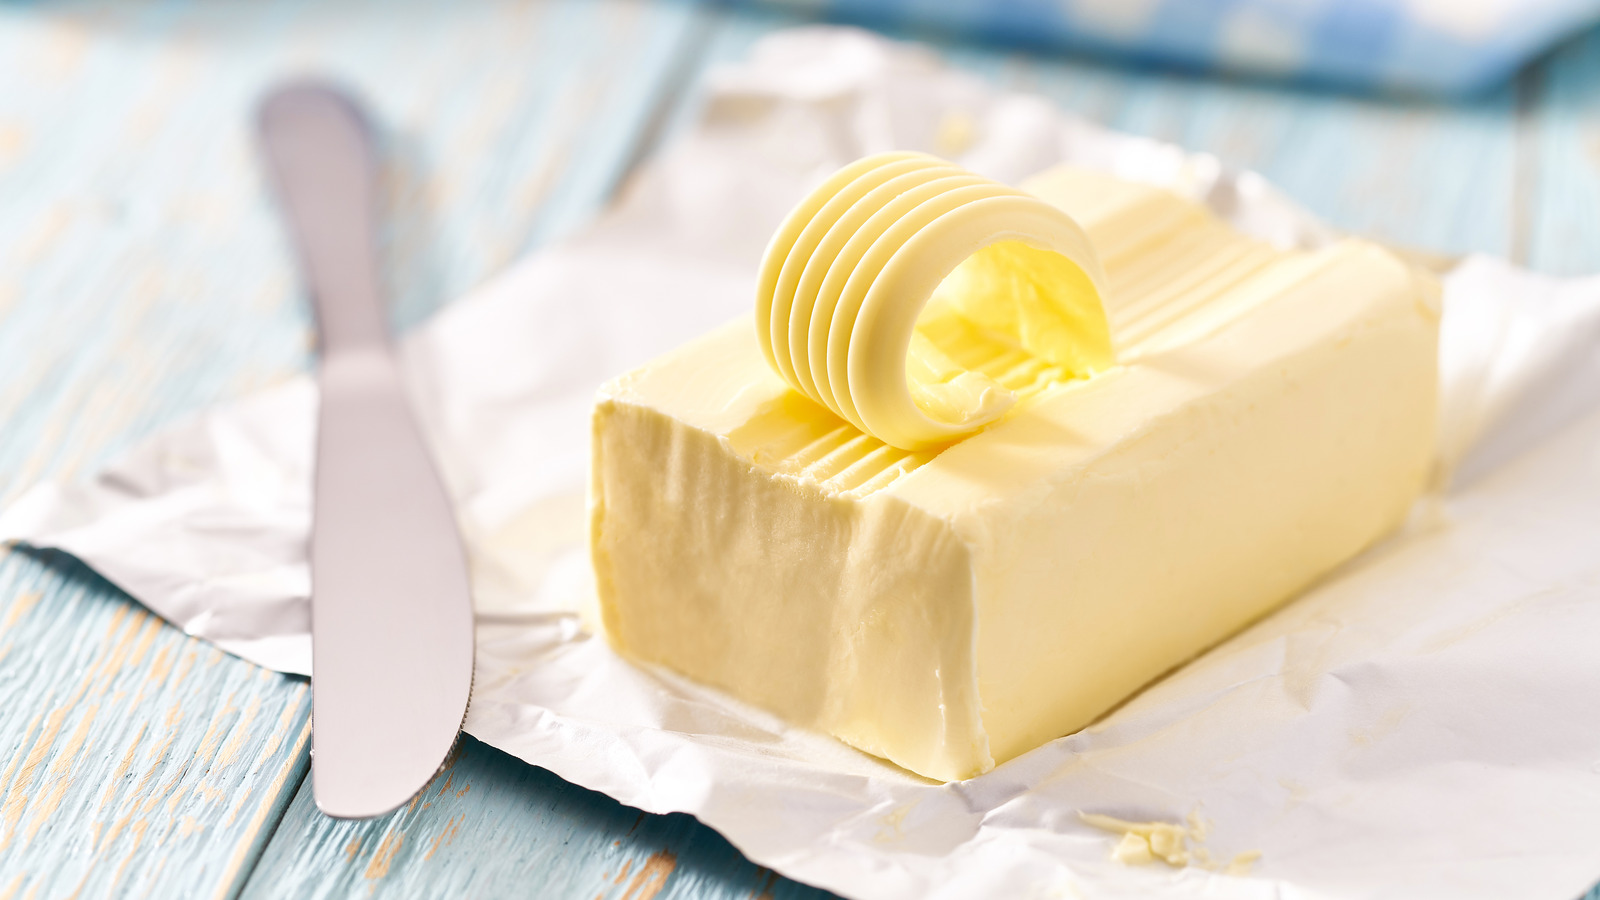 https://www.thedailymeal.com/img/gallery/12-hacks-for-softening-butter-youll-wish-you-knew-sooner/l-intro-1701956313.jpg